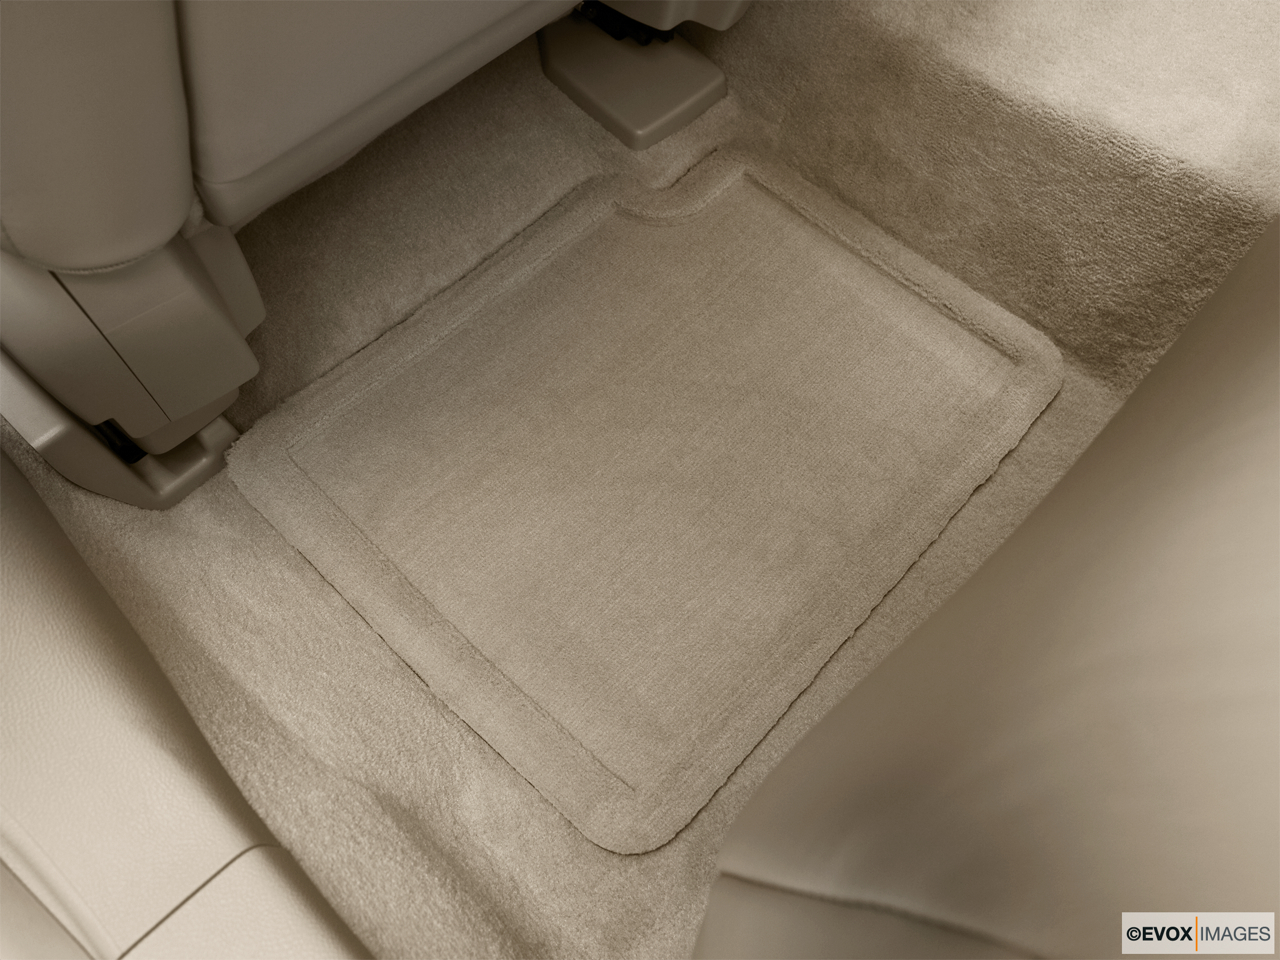 2010 Cadillac DTS Luxury Collection Rear driver's side floor mat. Mid-seat level from outside looking in. 